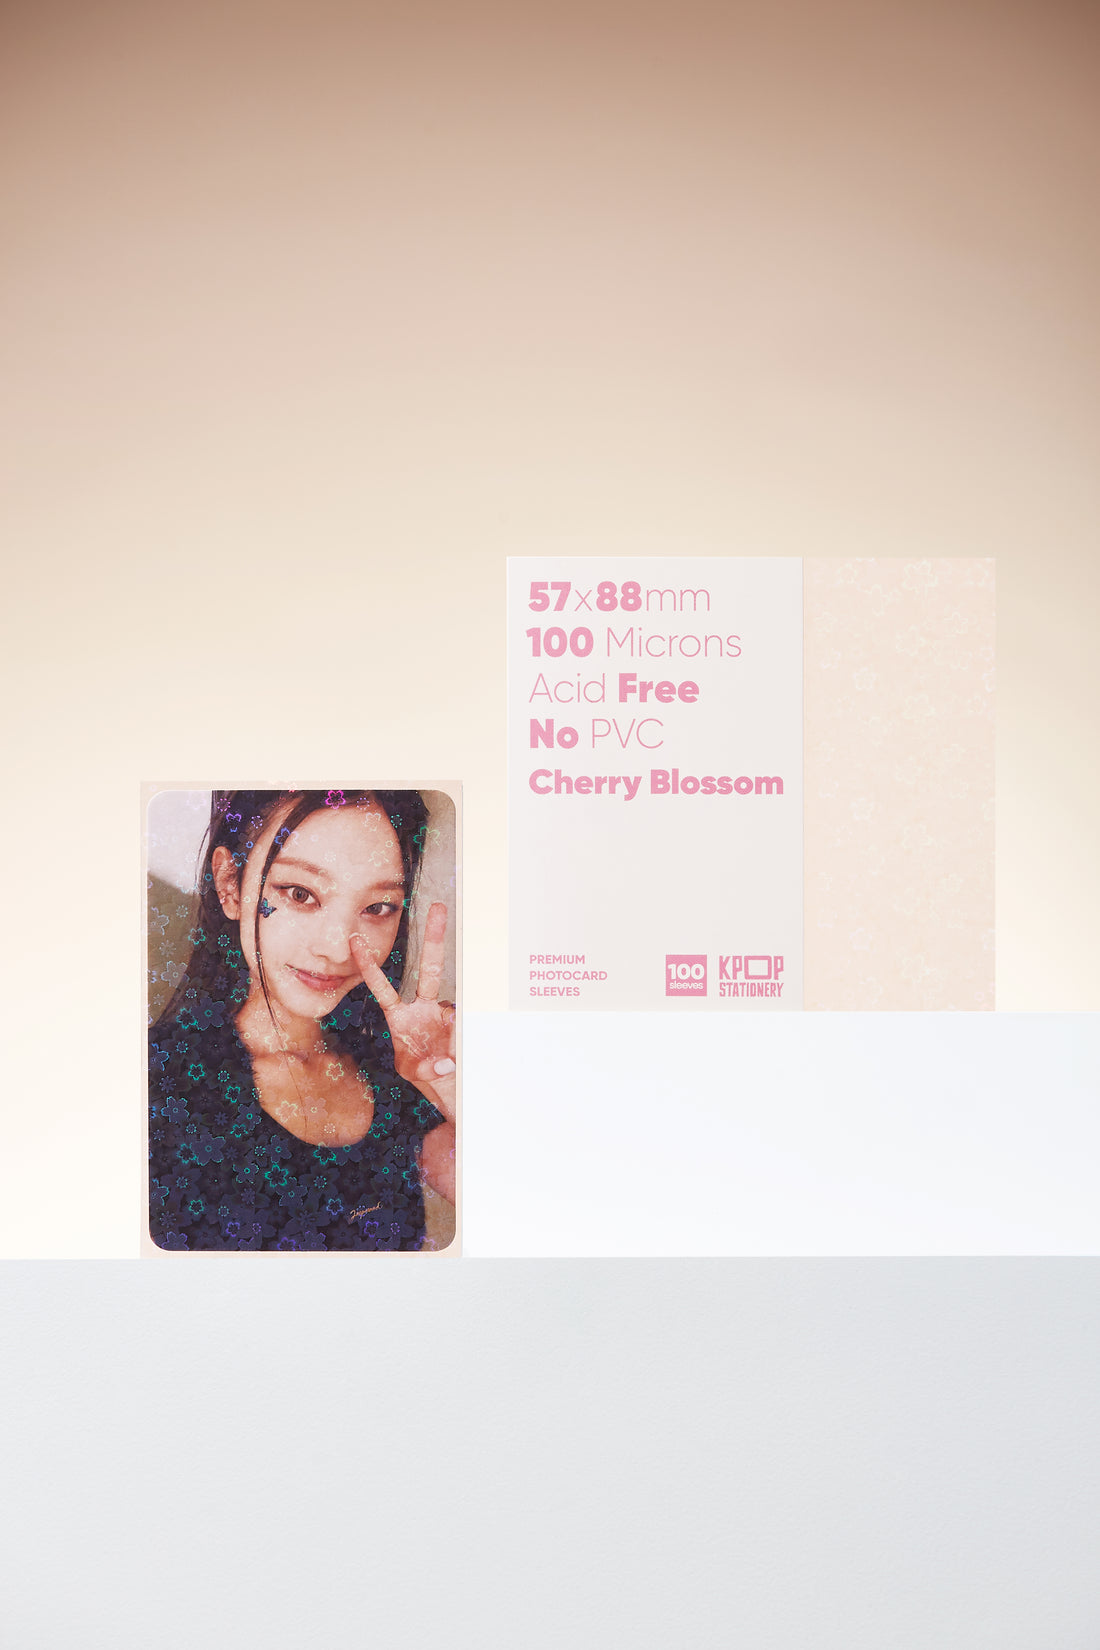 kpop cherry-blossom holographic photocard sleeves for 57 x 88